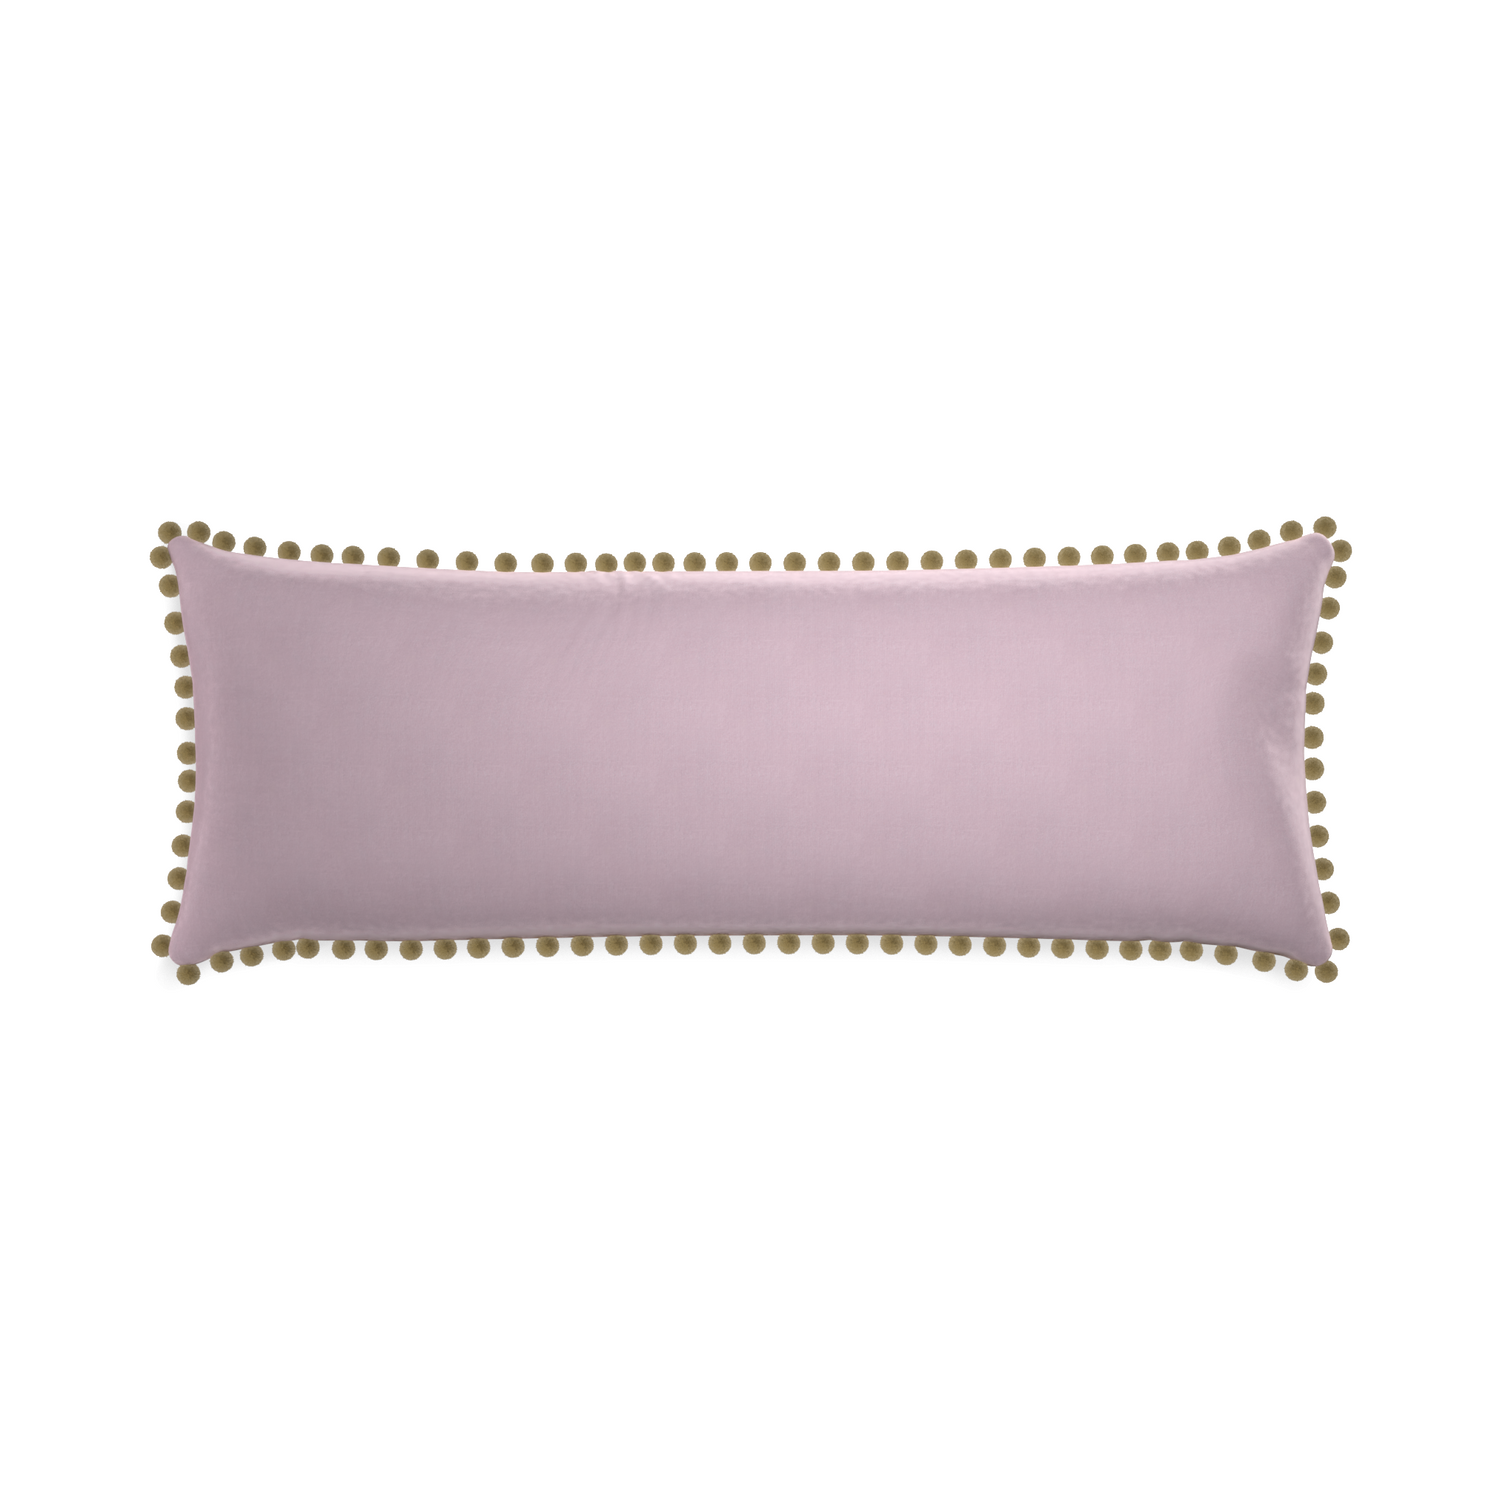 Xl-lumbar lilac velvet custom lilacpillow with olive pom pom on white background